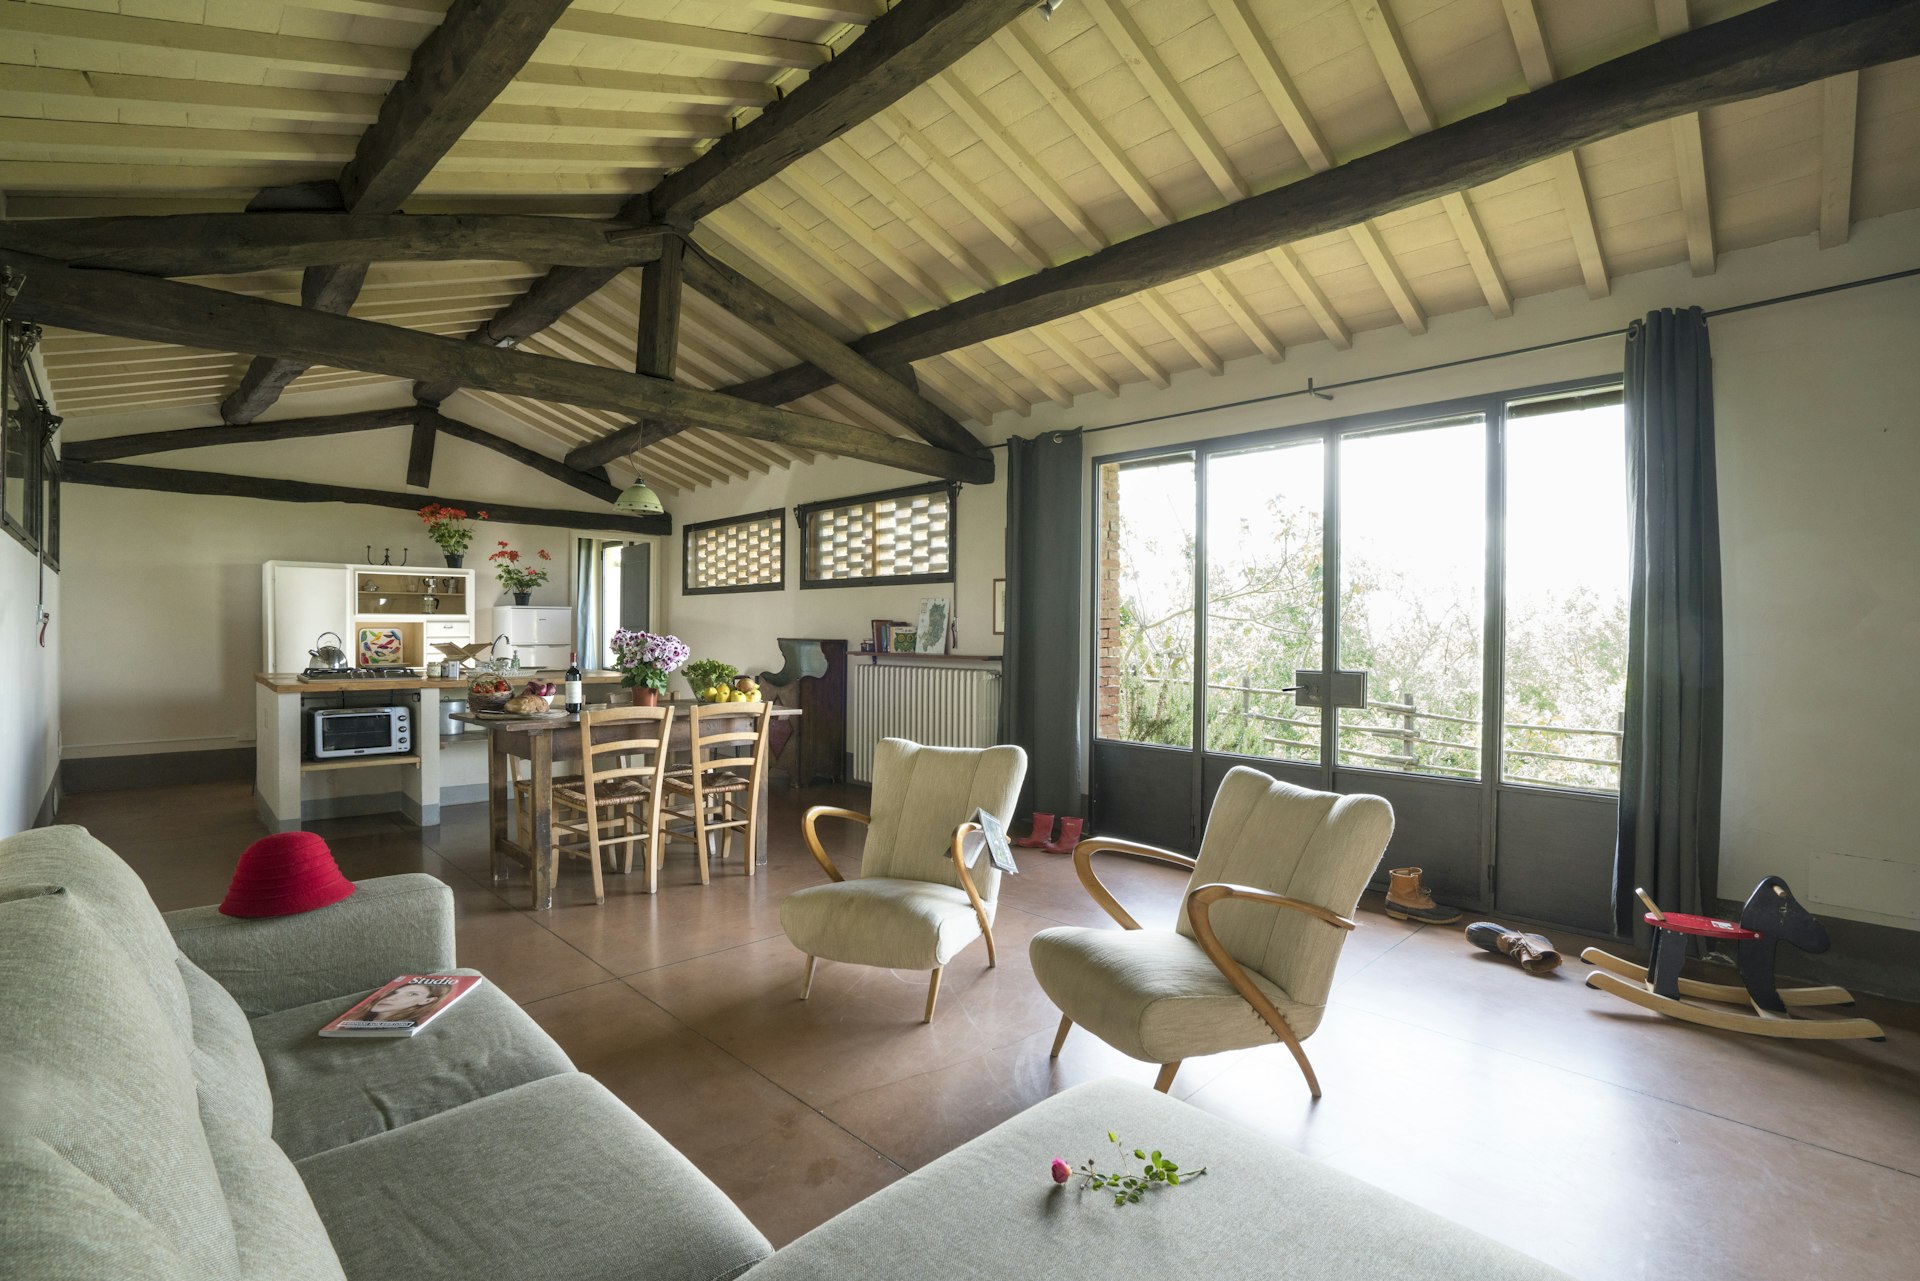 A spacious, rustic great room at Fattoria Barbialla Nuova features midcentury modern minimalist furniture, rustic farmhouse beams overhead, a child's wooden rocking horse, and a red hat sitting on the sofa